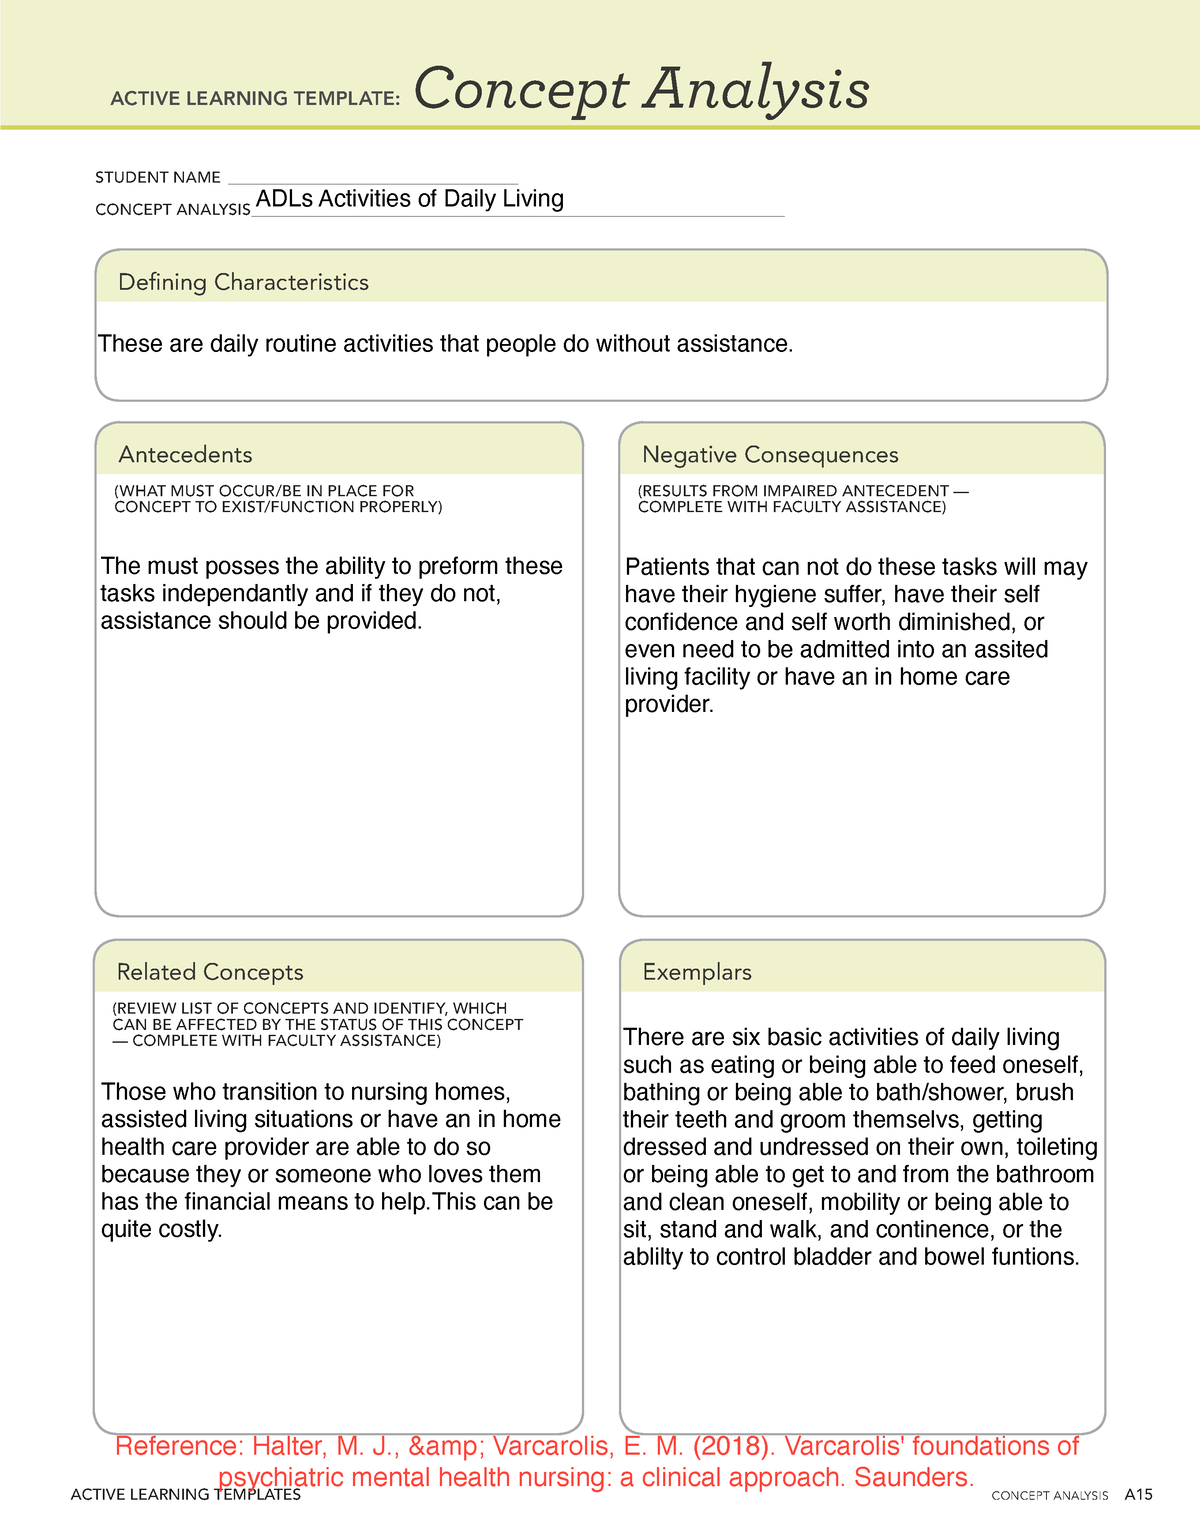 adls-ati-template-active-learning-templates-concept-analysis-a